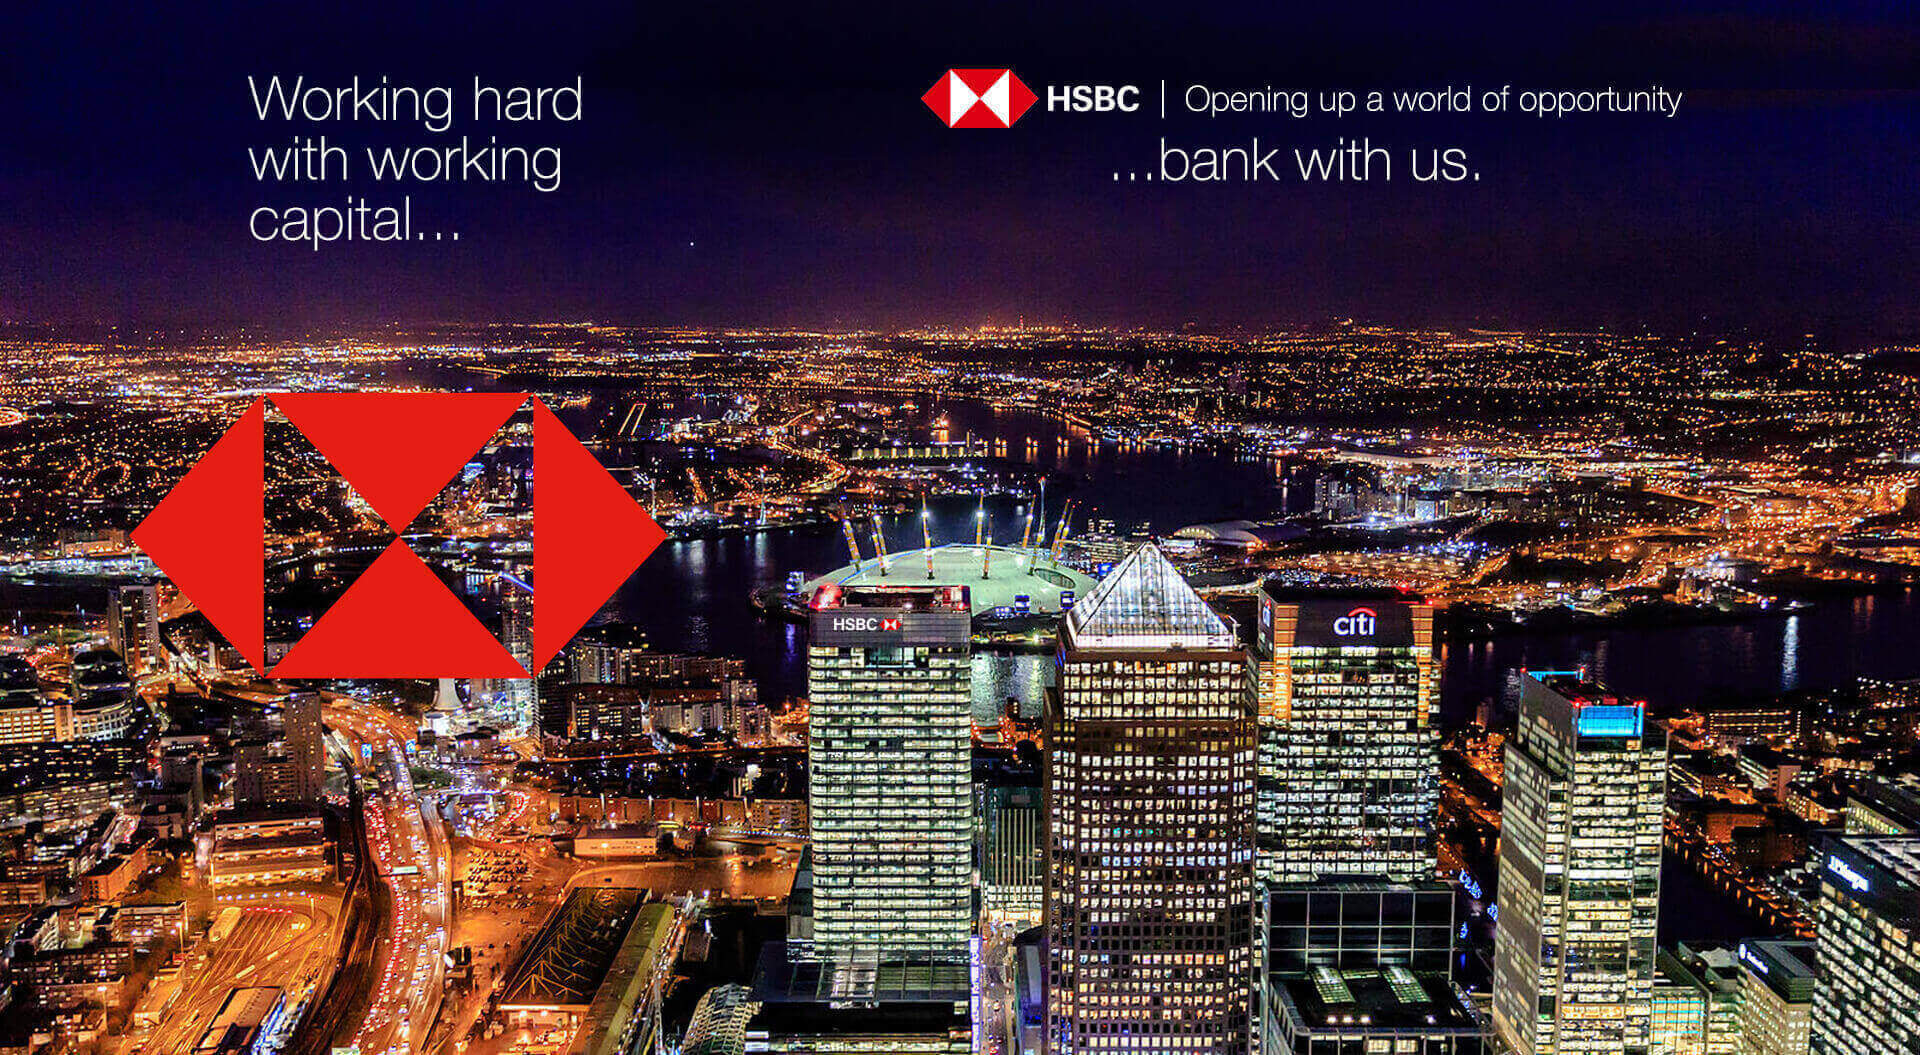 HSBC Bank advertising design city of London skyline. Message, “Working hard with working capital… bank with us” - logo design - strapline “Opening up a world of opportunity”